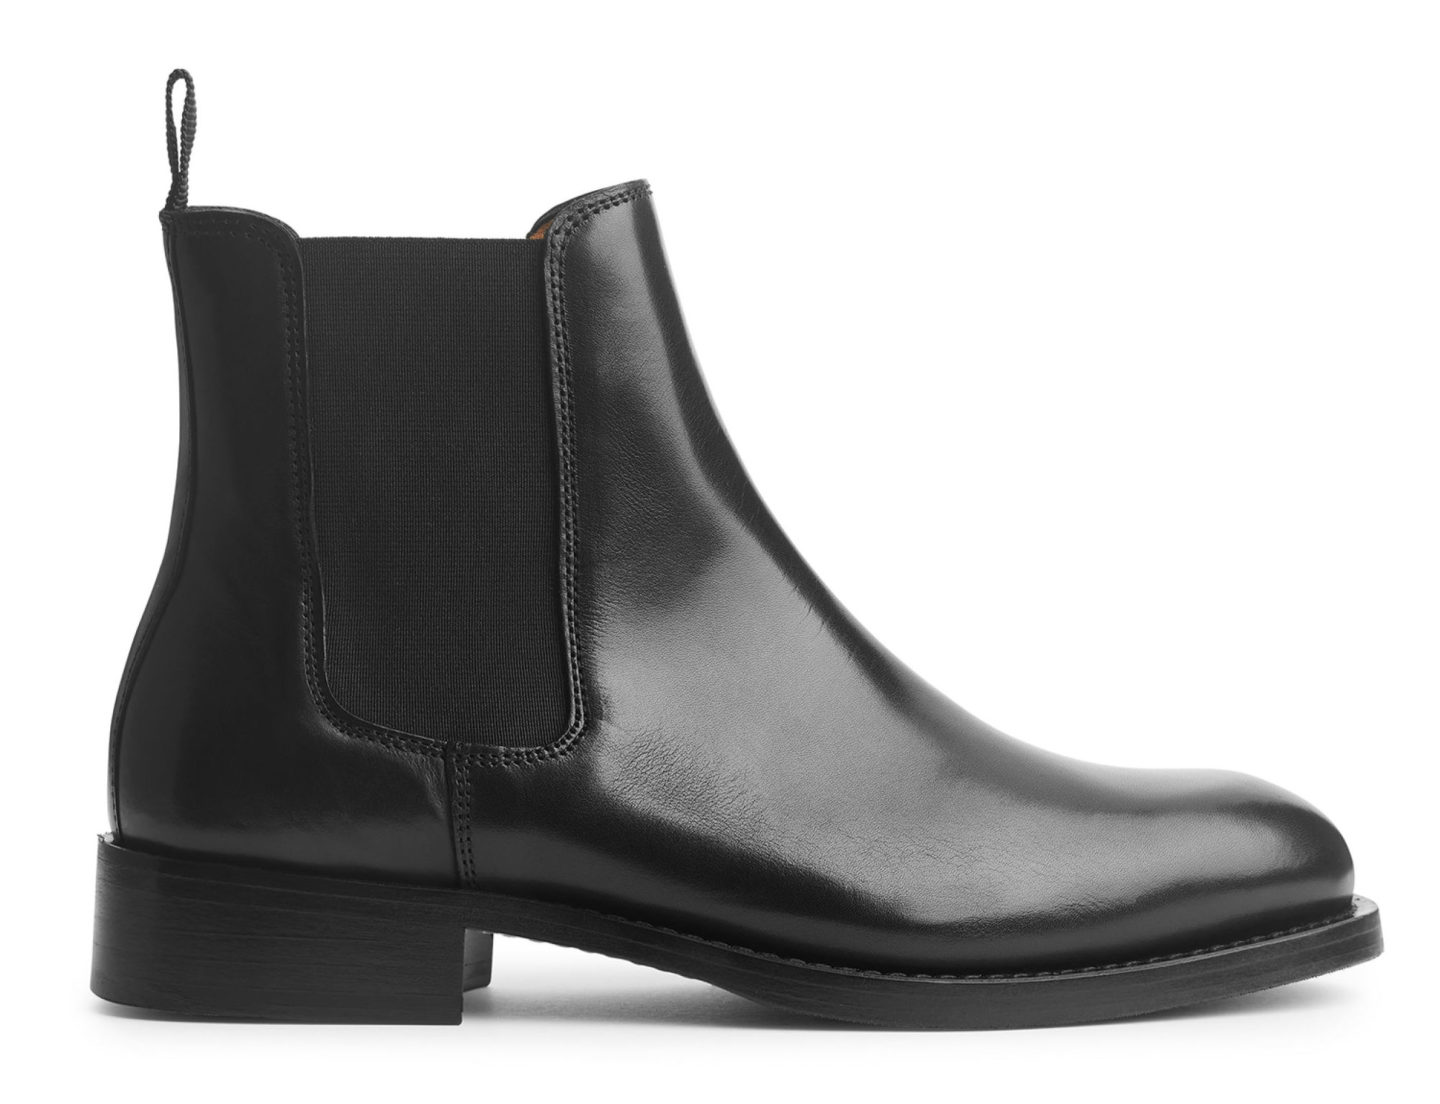 Black Chelsea ankle boots